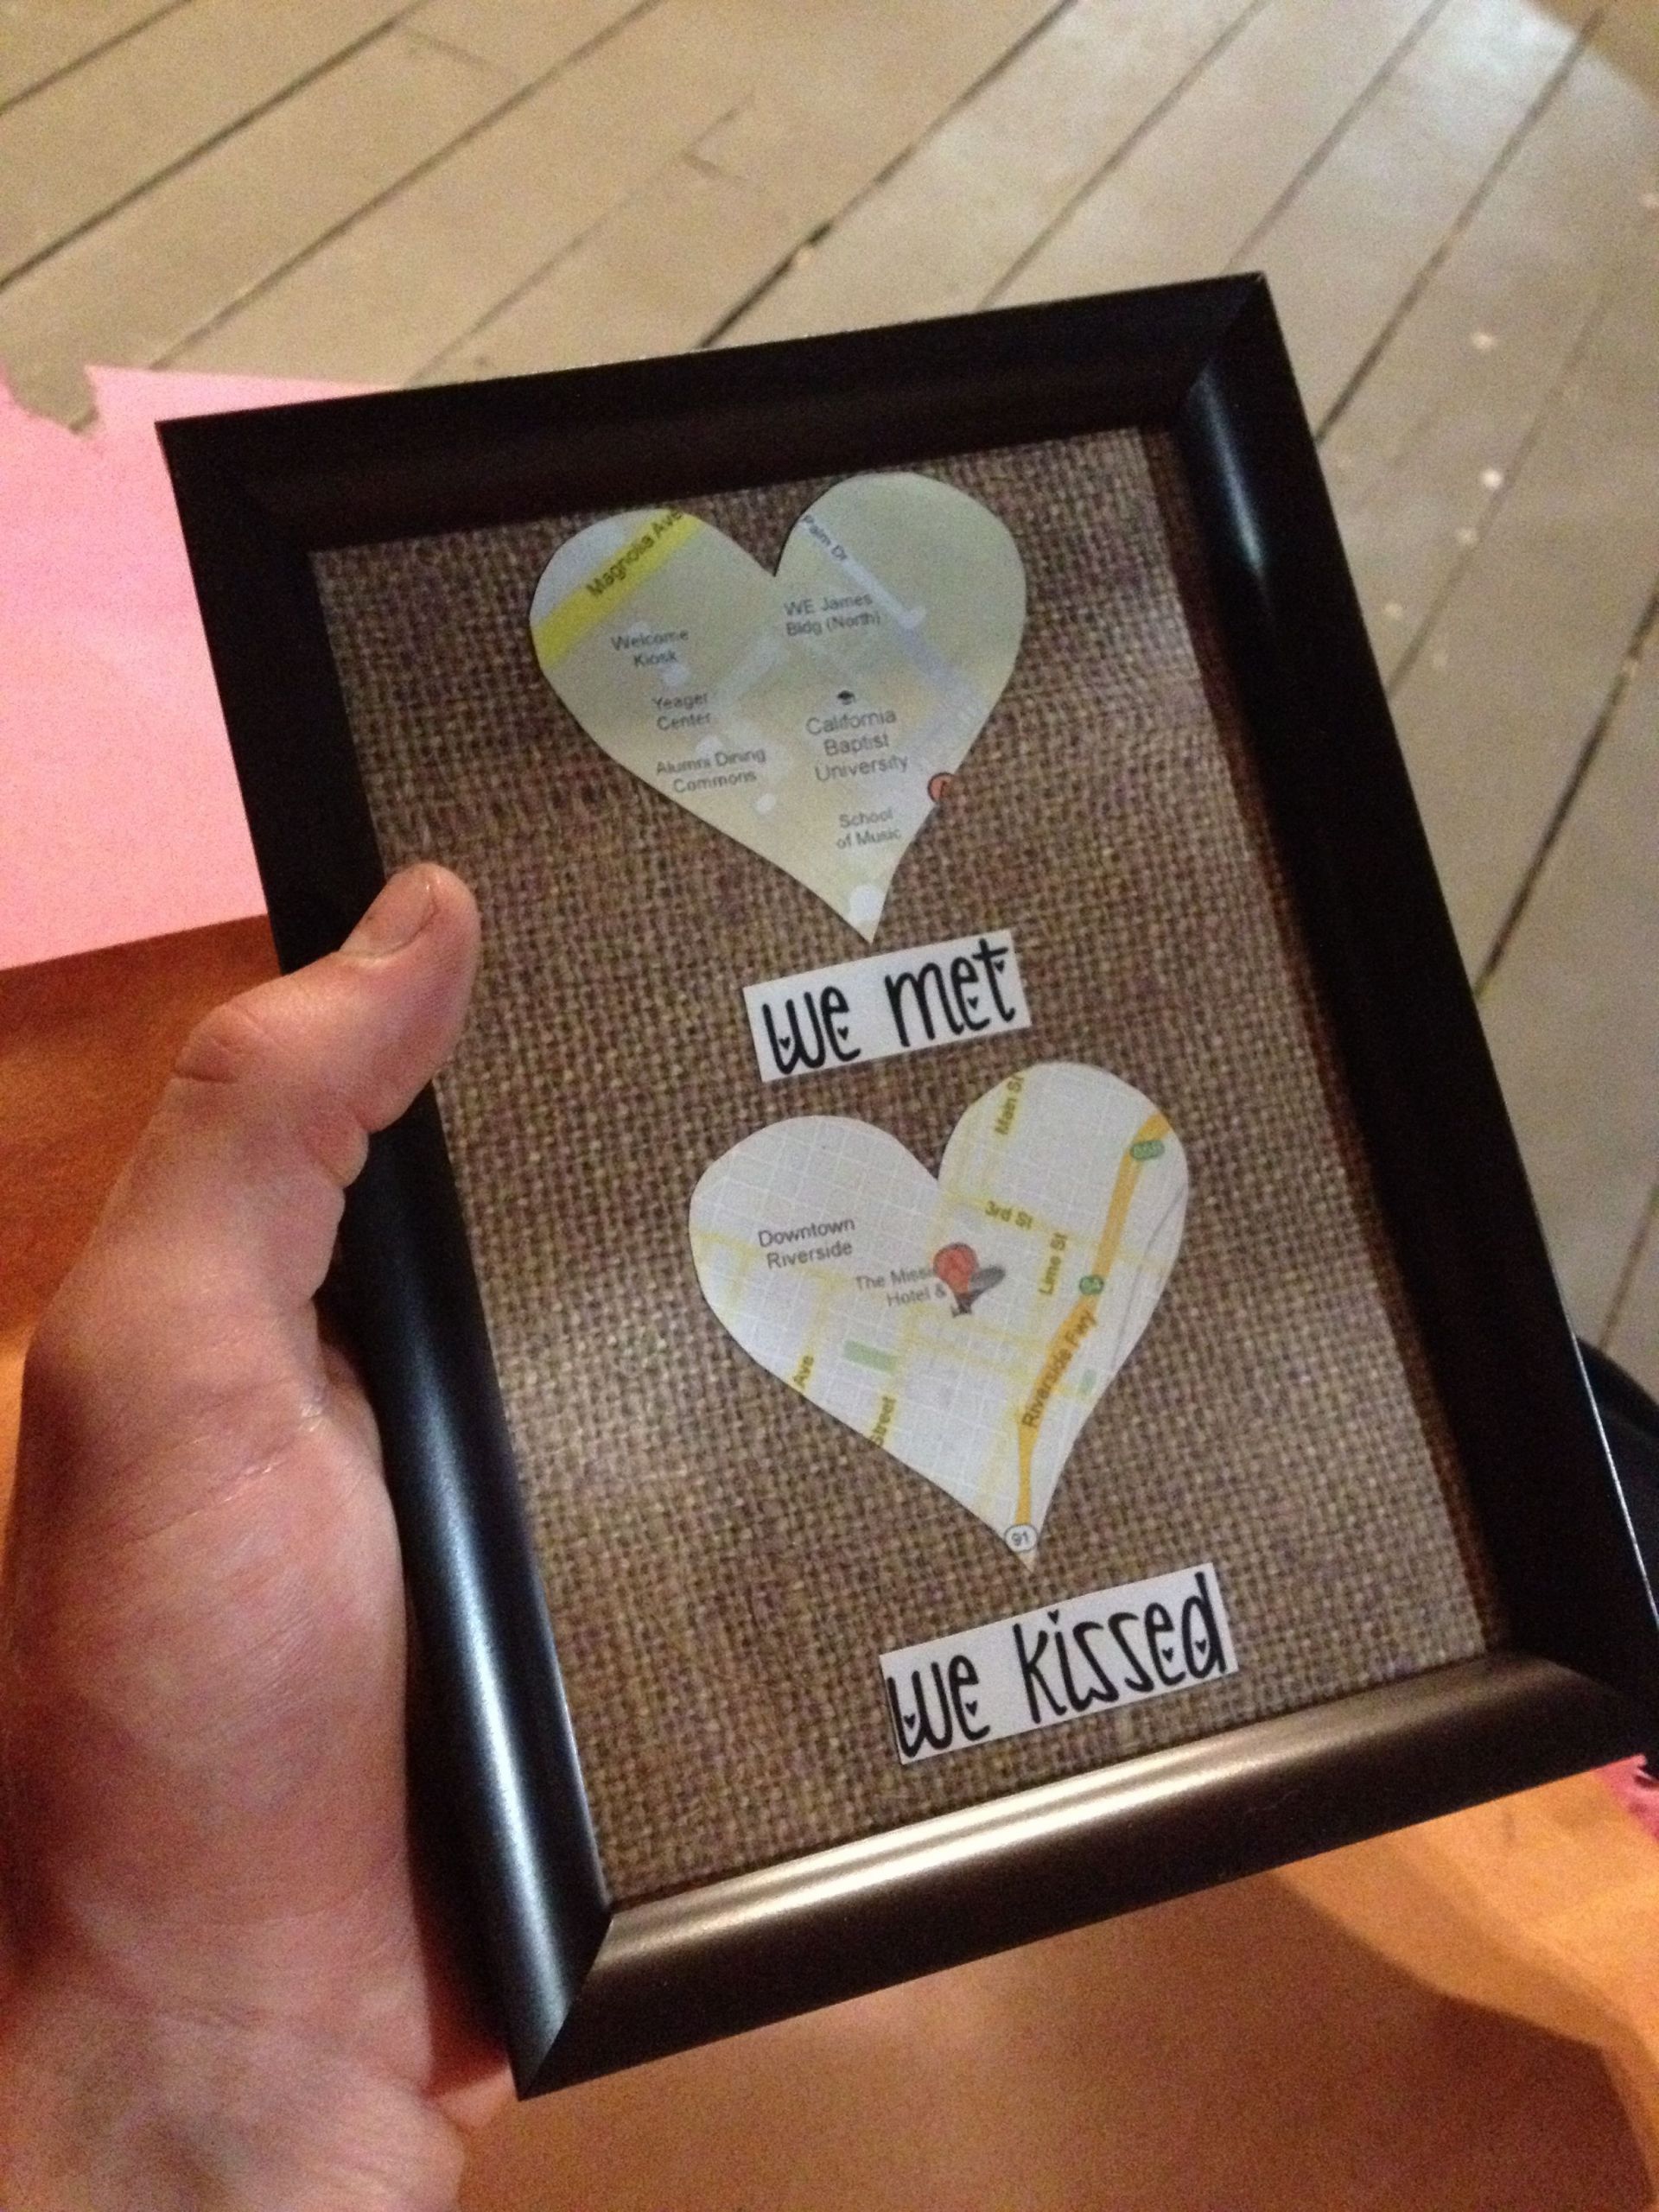 Anniversary Gift Ideas Pinterest
 How to Make Easy Valentines Gifts for Him He ll Actually